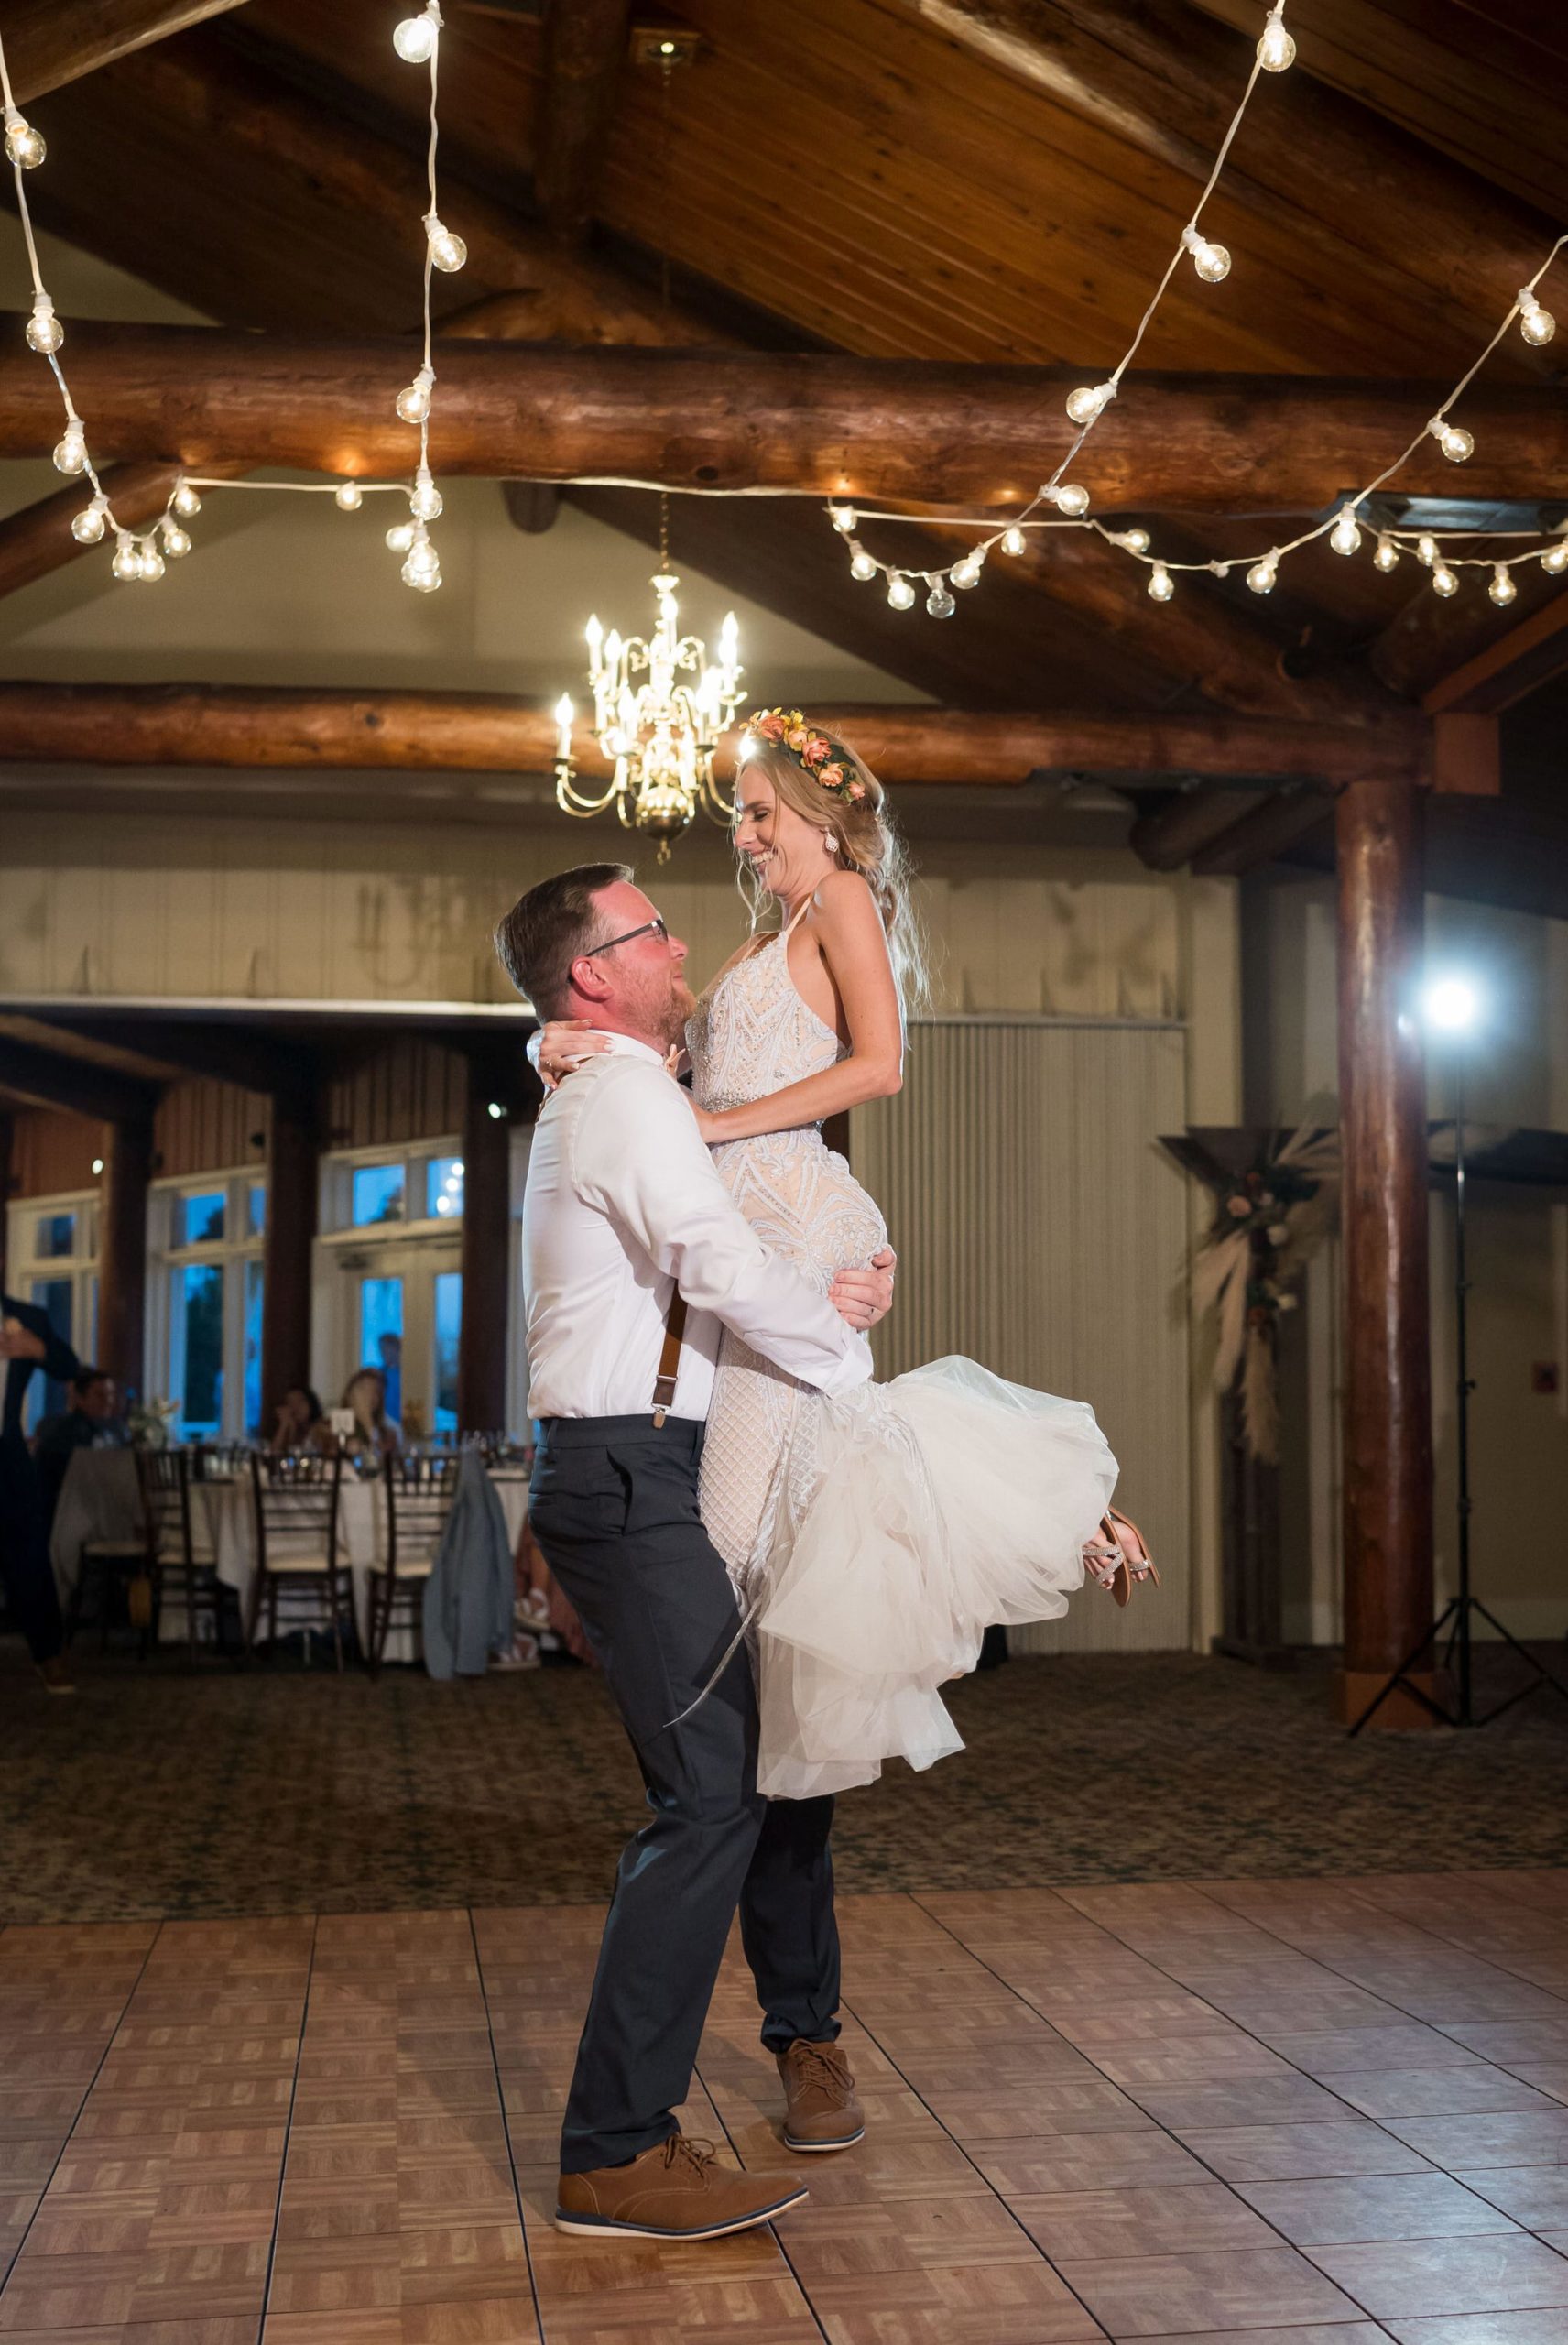 A groom lifts a bride into the air on the dance floor at their Mission Pointe Resort wedding.